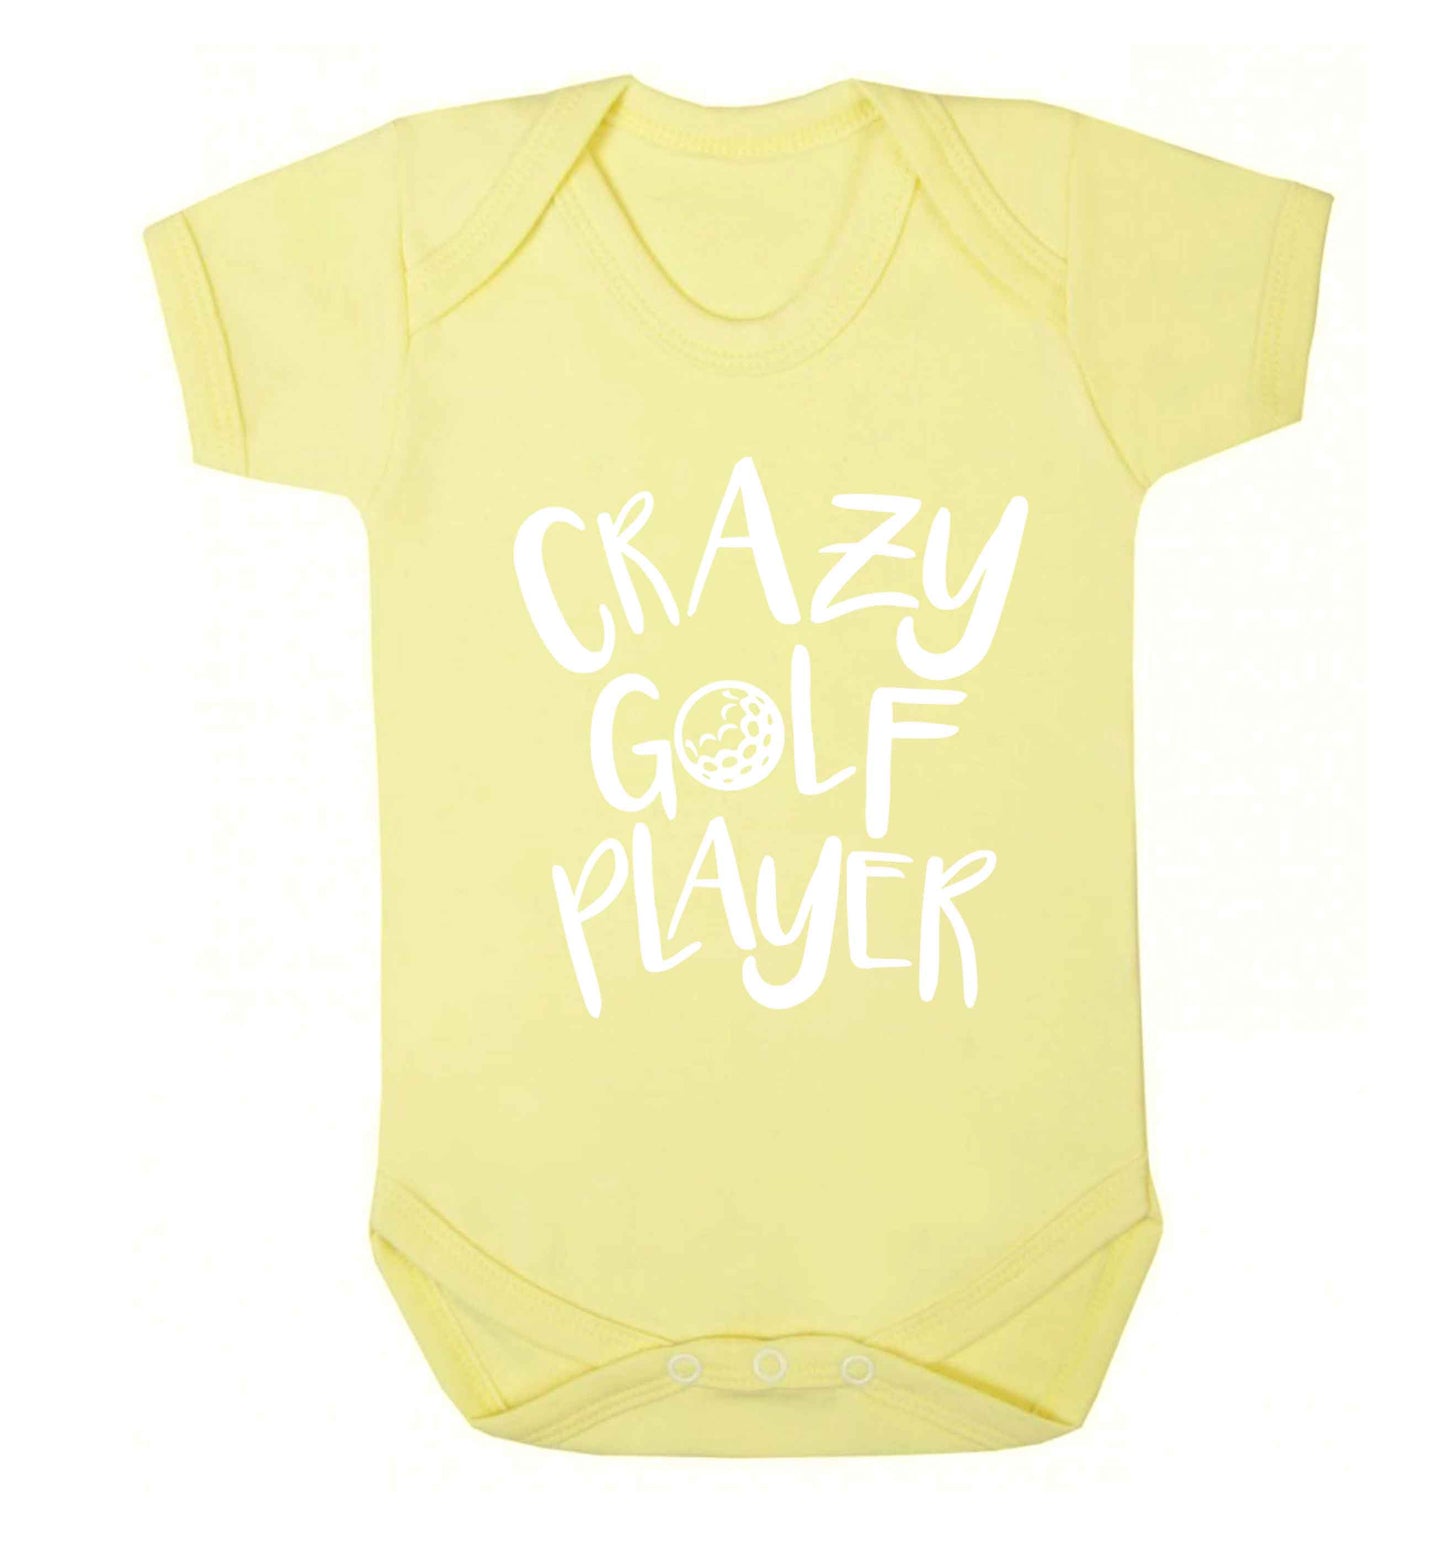 Crazy golf player Baby Vest pale yellow 18-24 months